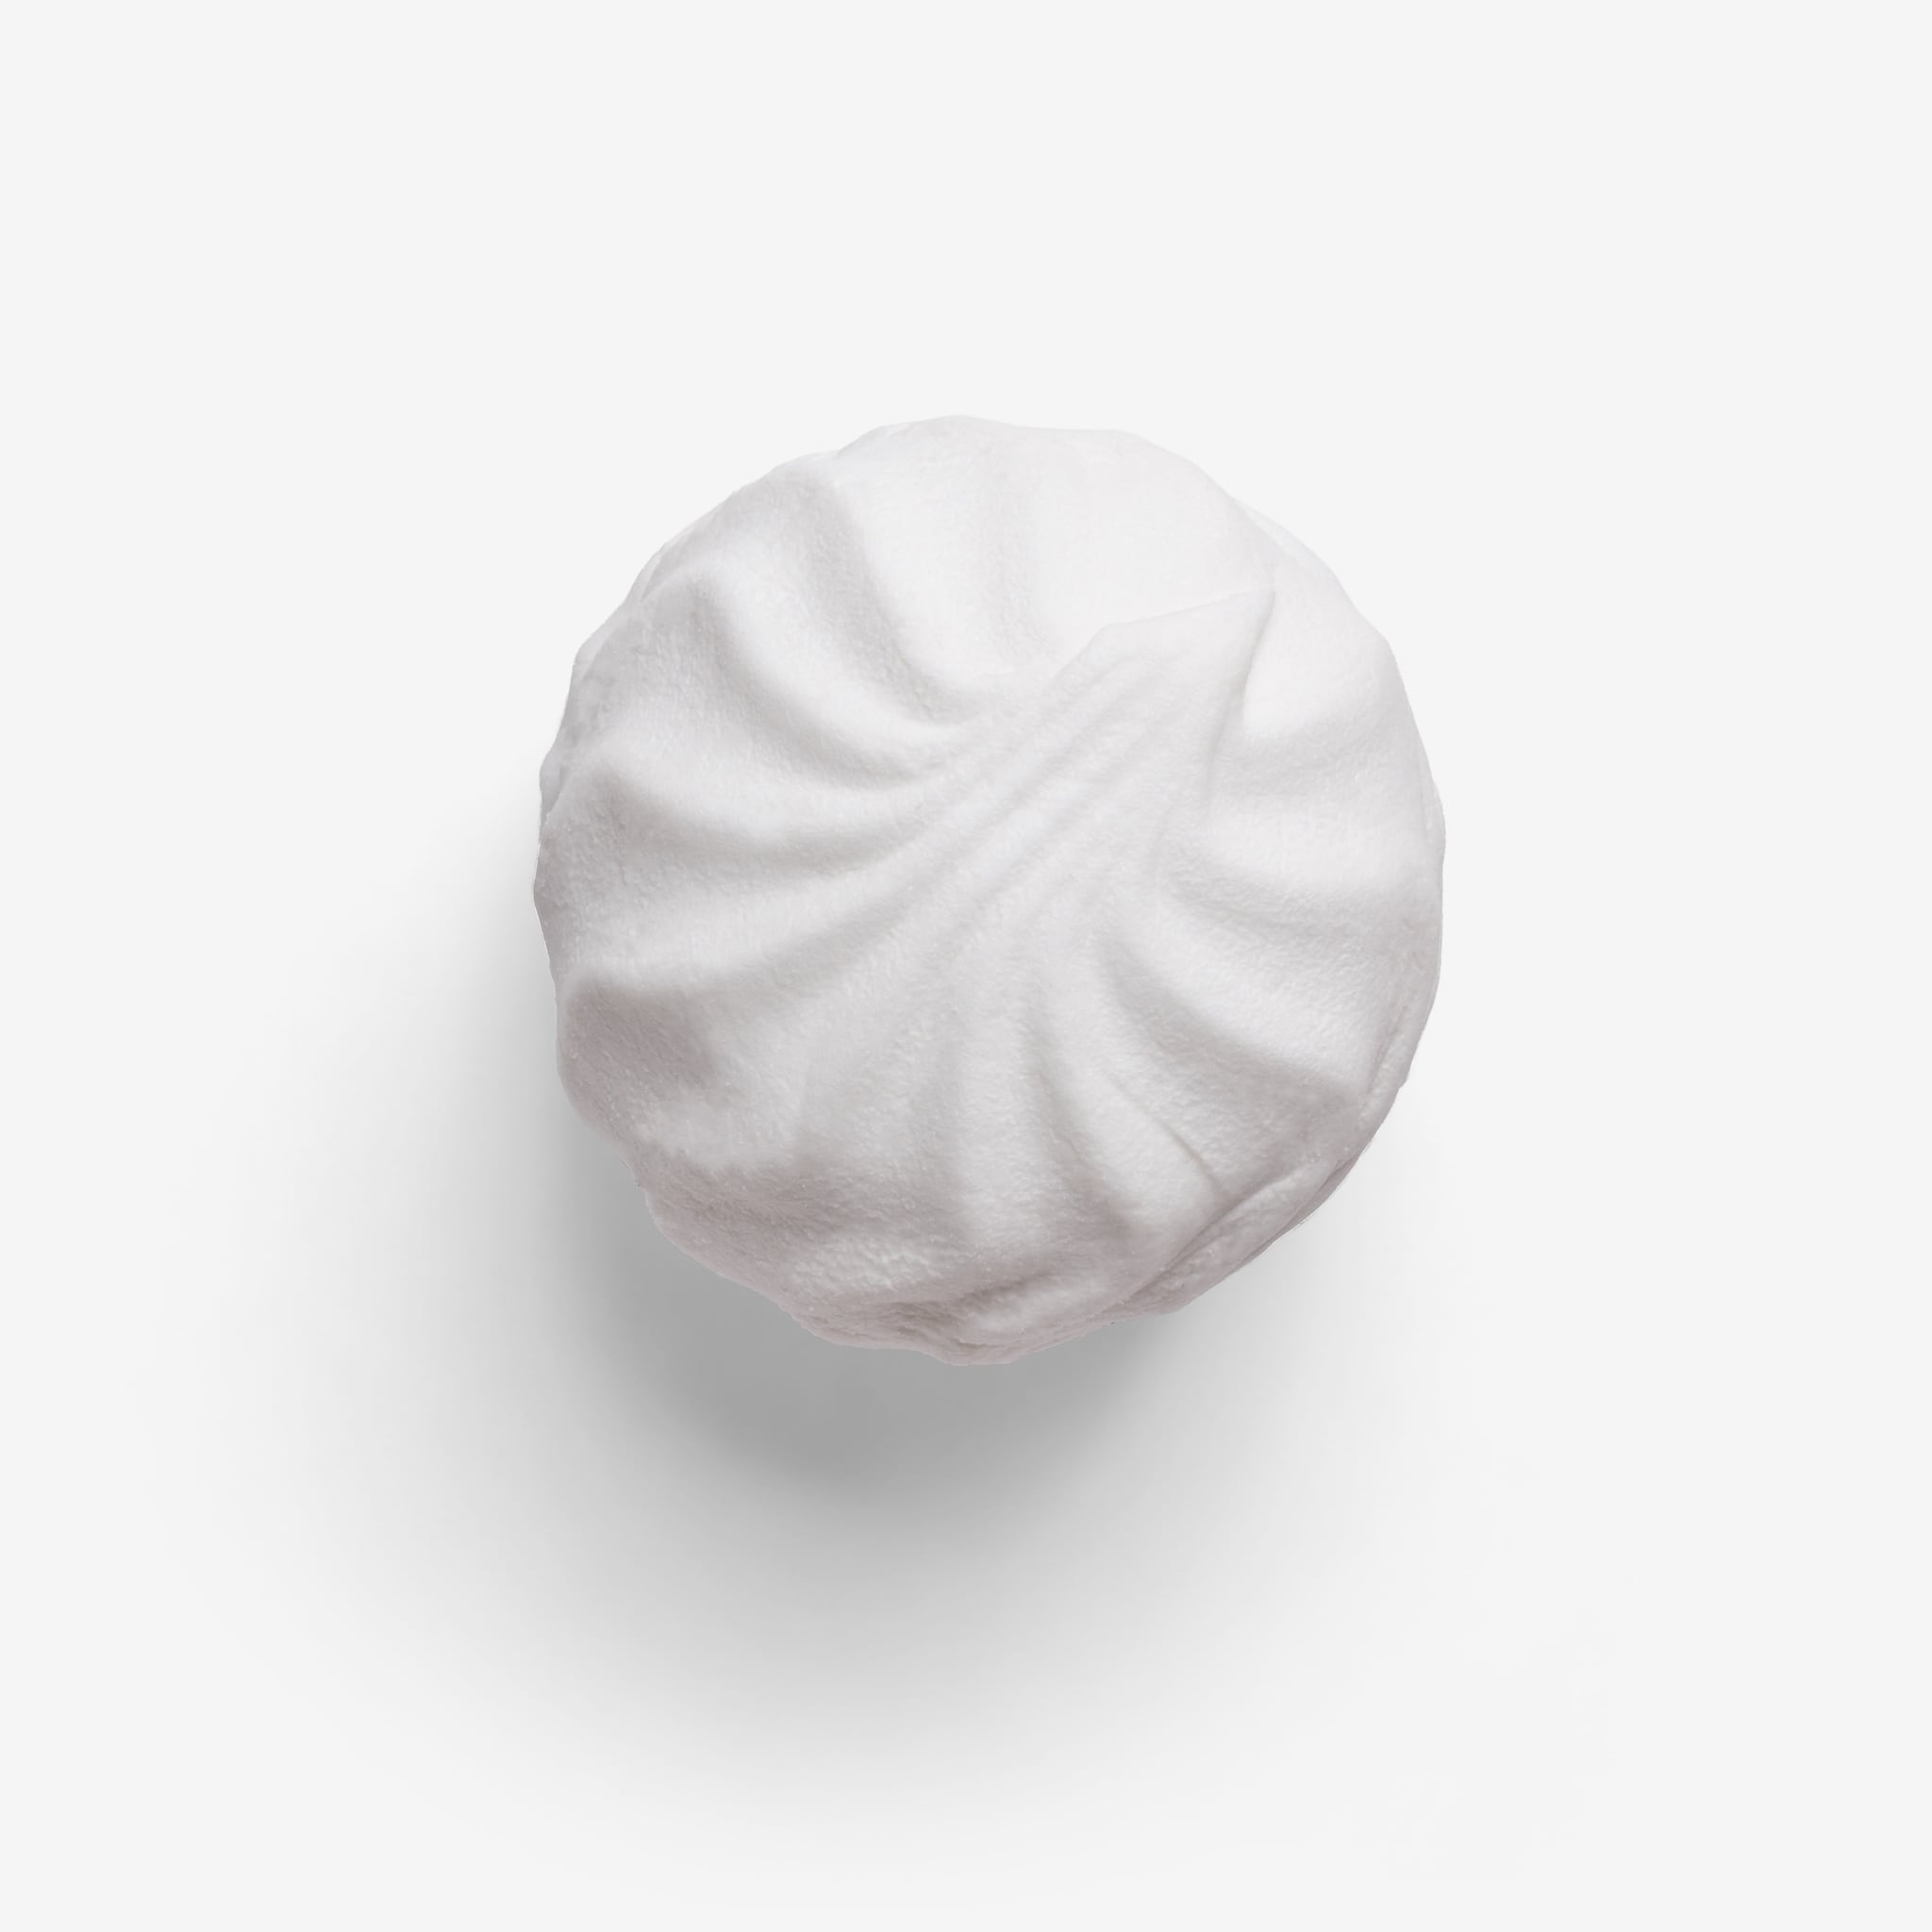 Marshmallow image asset with transparent background